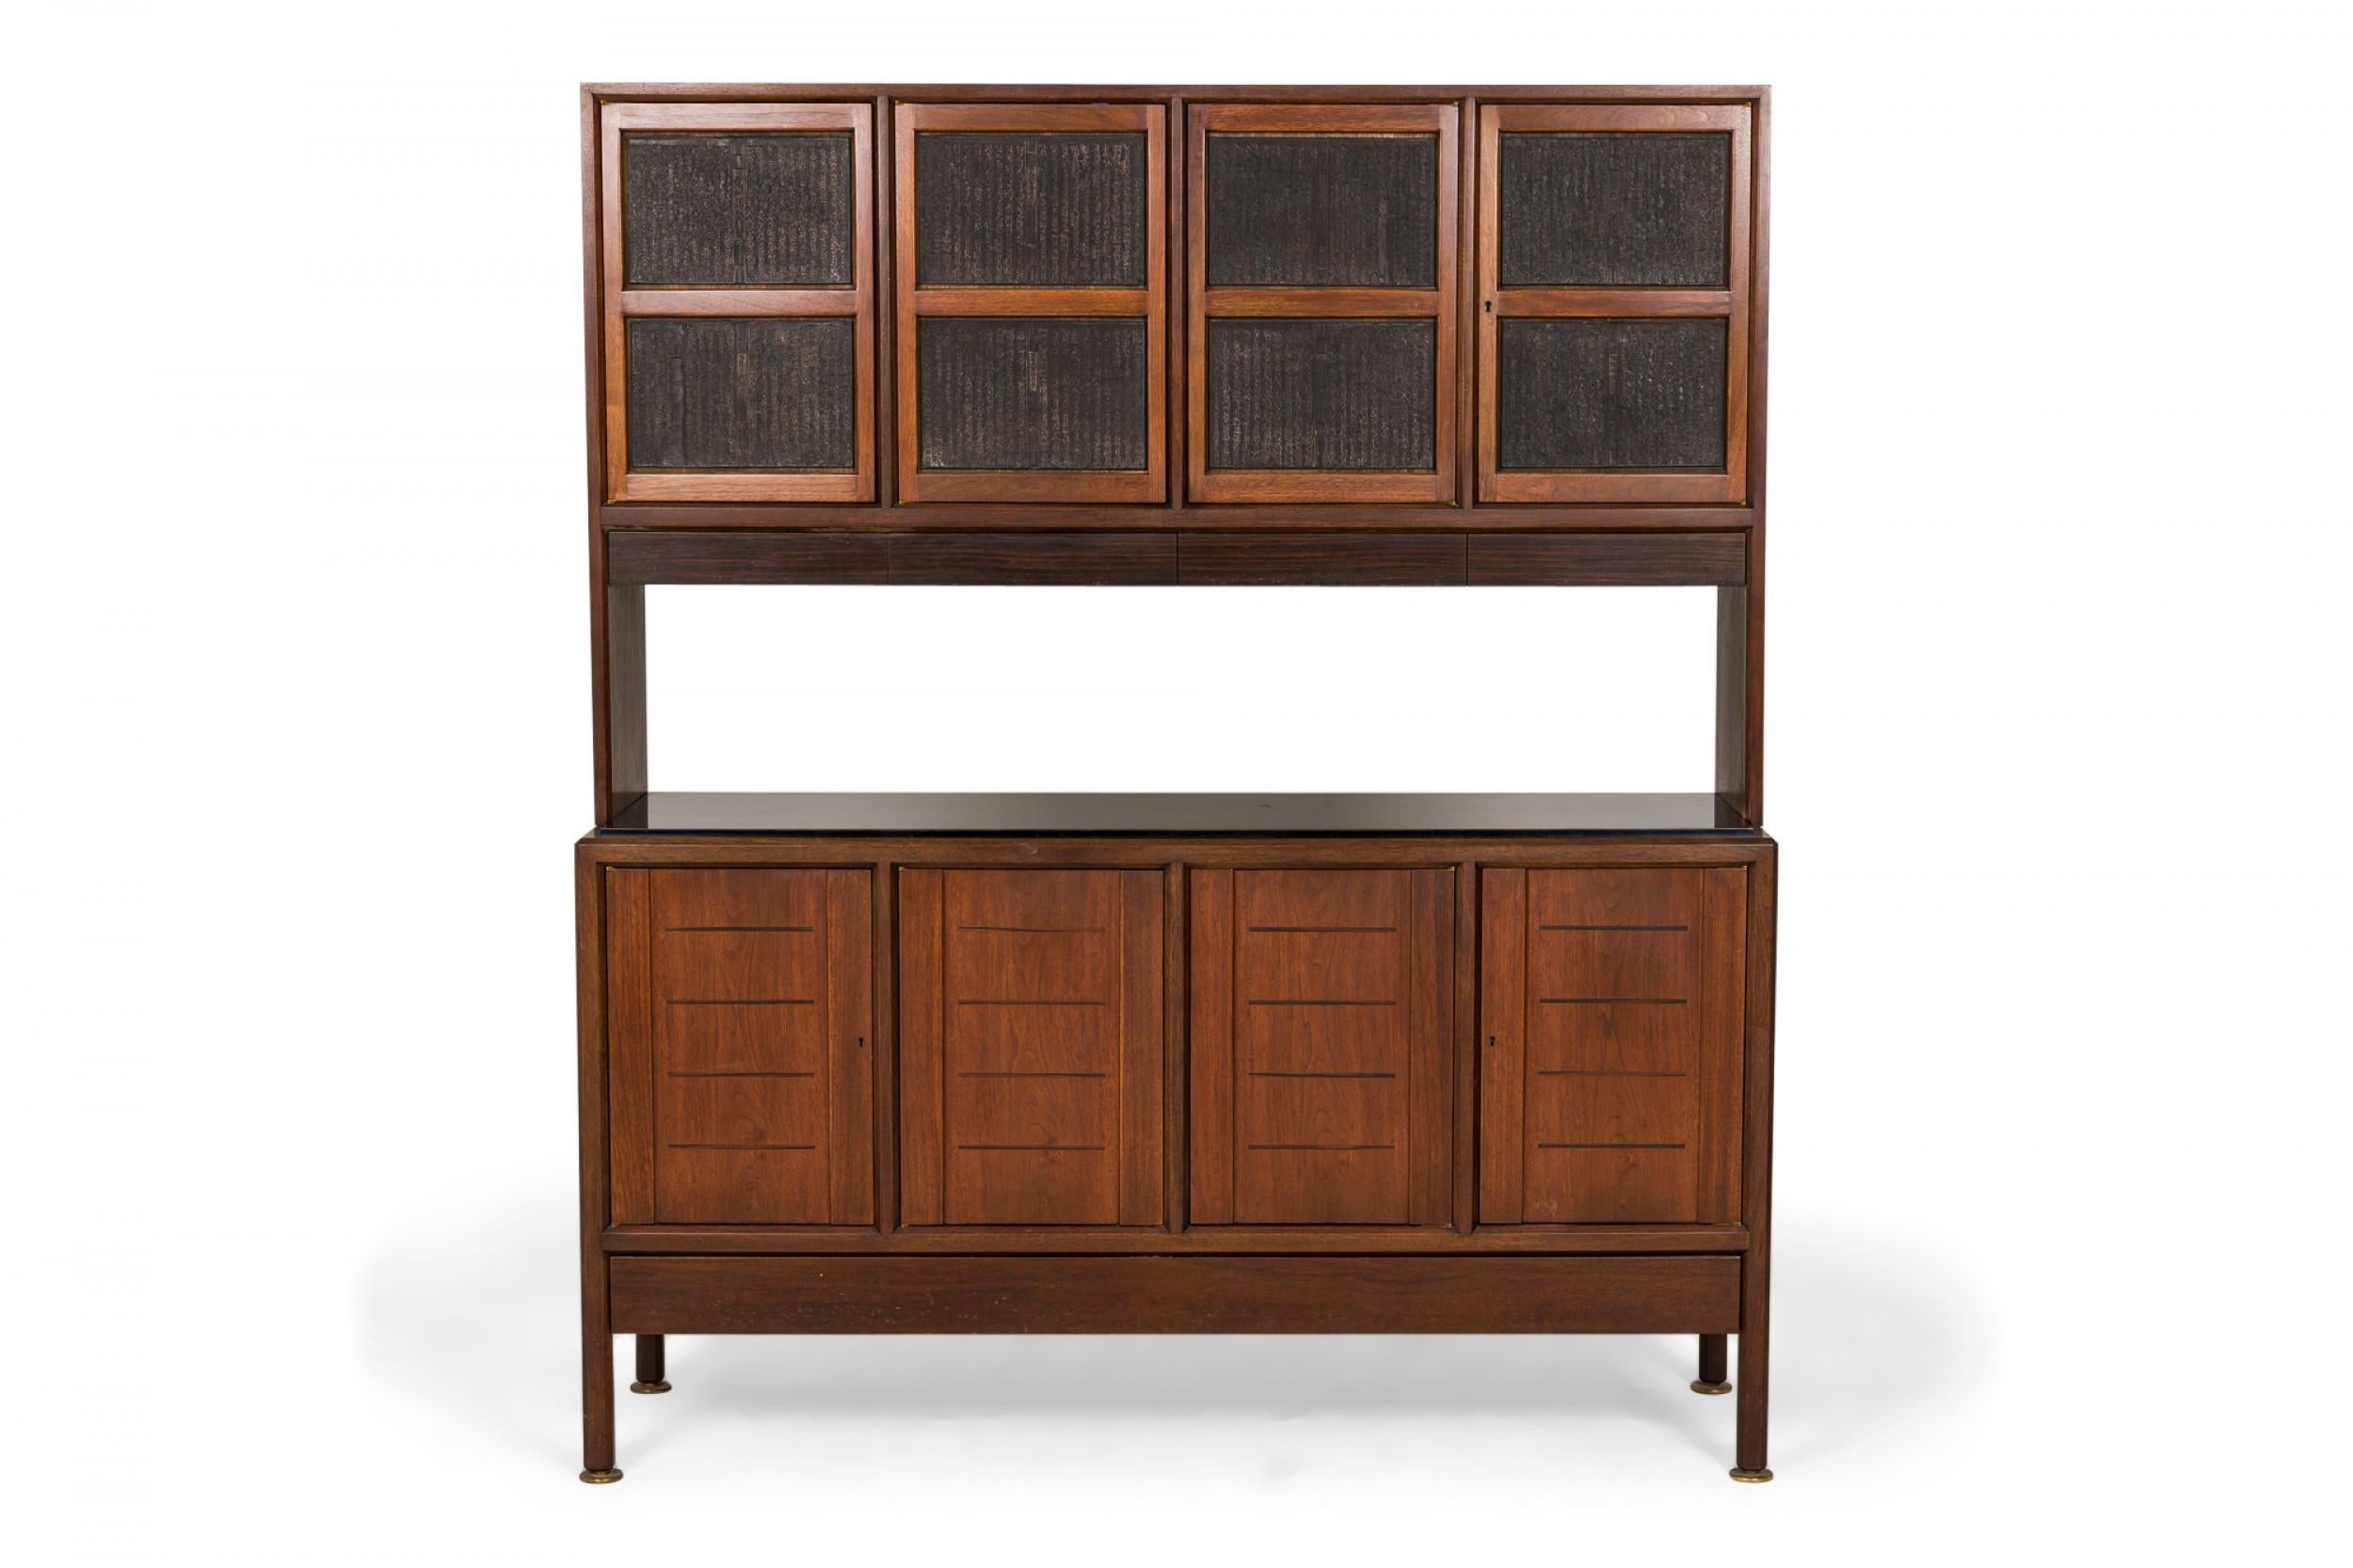 Mid-Century two-section china cabinet / hutch with an upper walnut case with four rosewood cabinet fronts featuring inset Japanese wood blocks depicting pastoral scenes with adjacent character panels that open to reveal four interior two-shelf